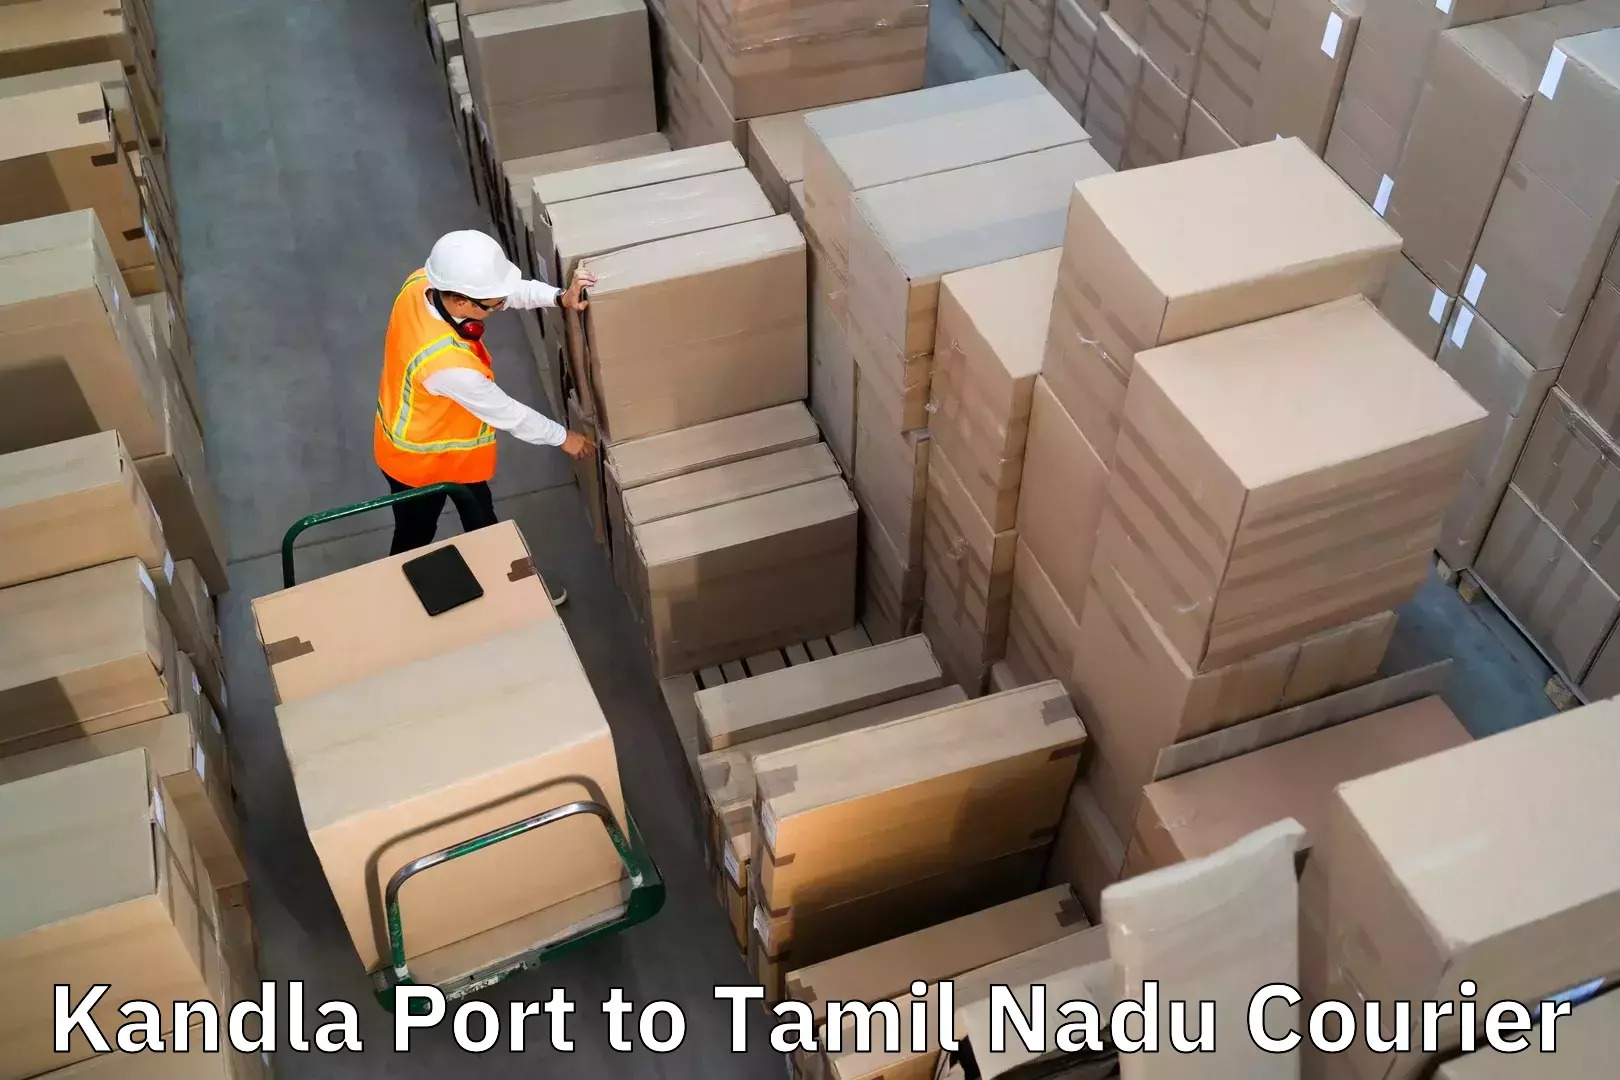 Excess baggage transport in Kandla Port to Saveetha Institute of Medical and Technical Sciences Chennai